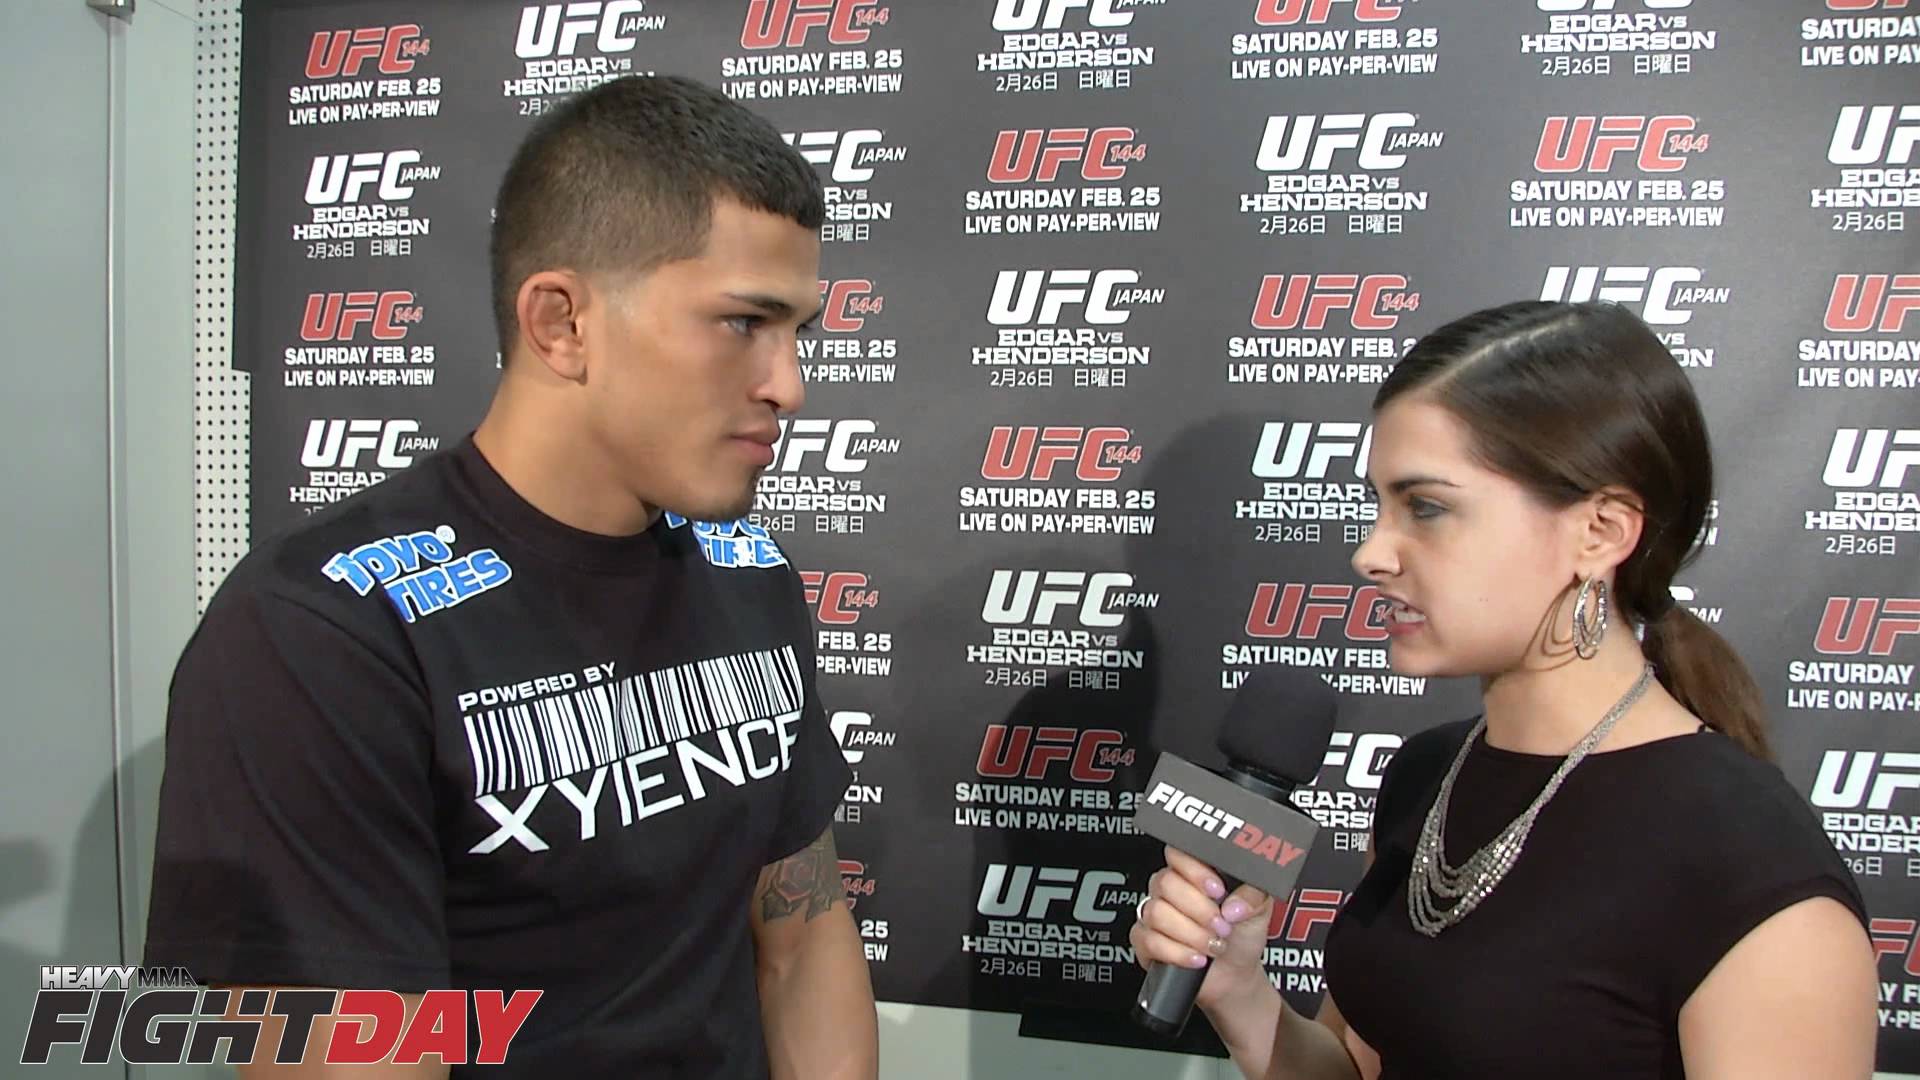 Anthony Pettis UFC 144 Post-Fight Interview MMA Video1920 x 1080